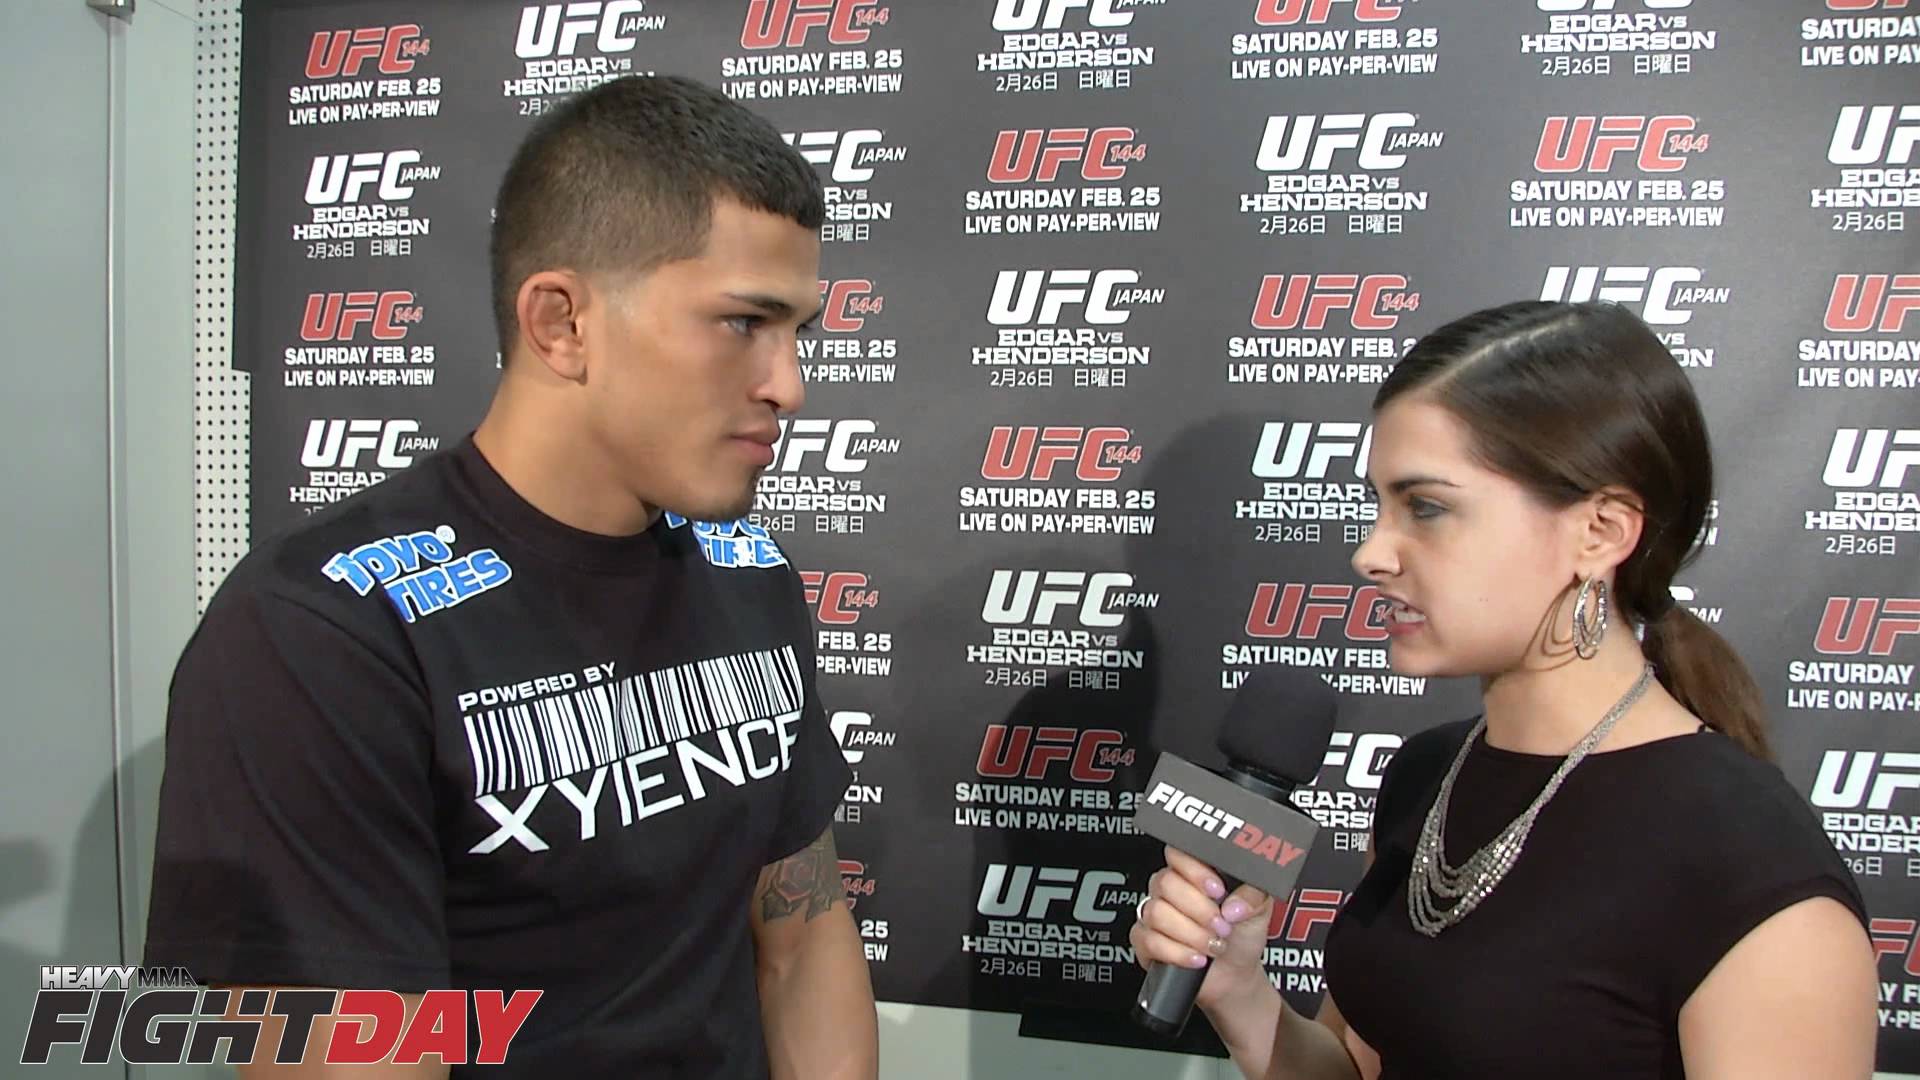 Anthony Pettis UFC 144 Post-Fight Interview MMA Video1920 x 1080